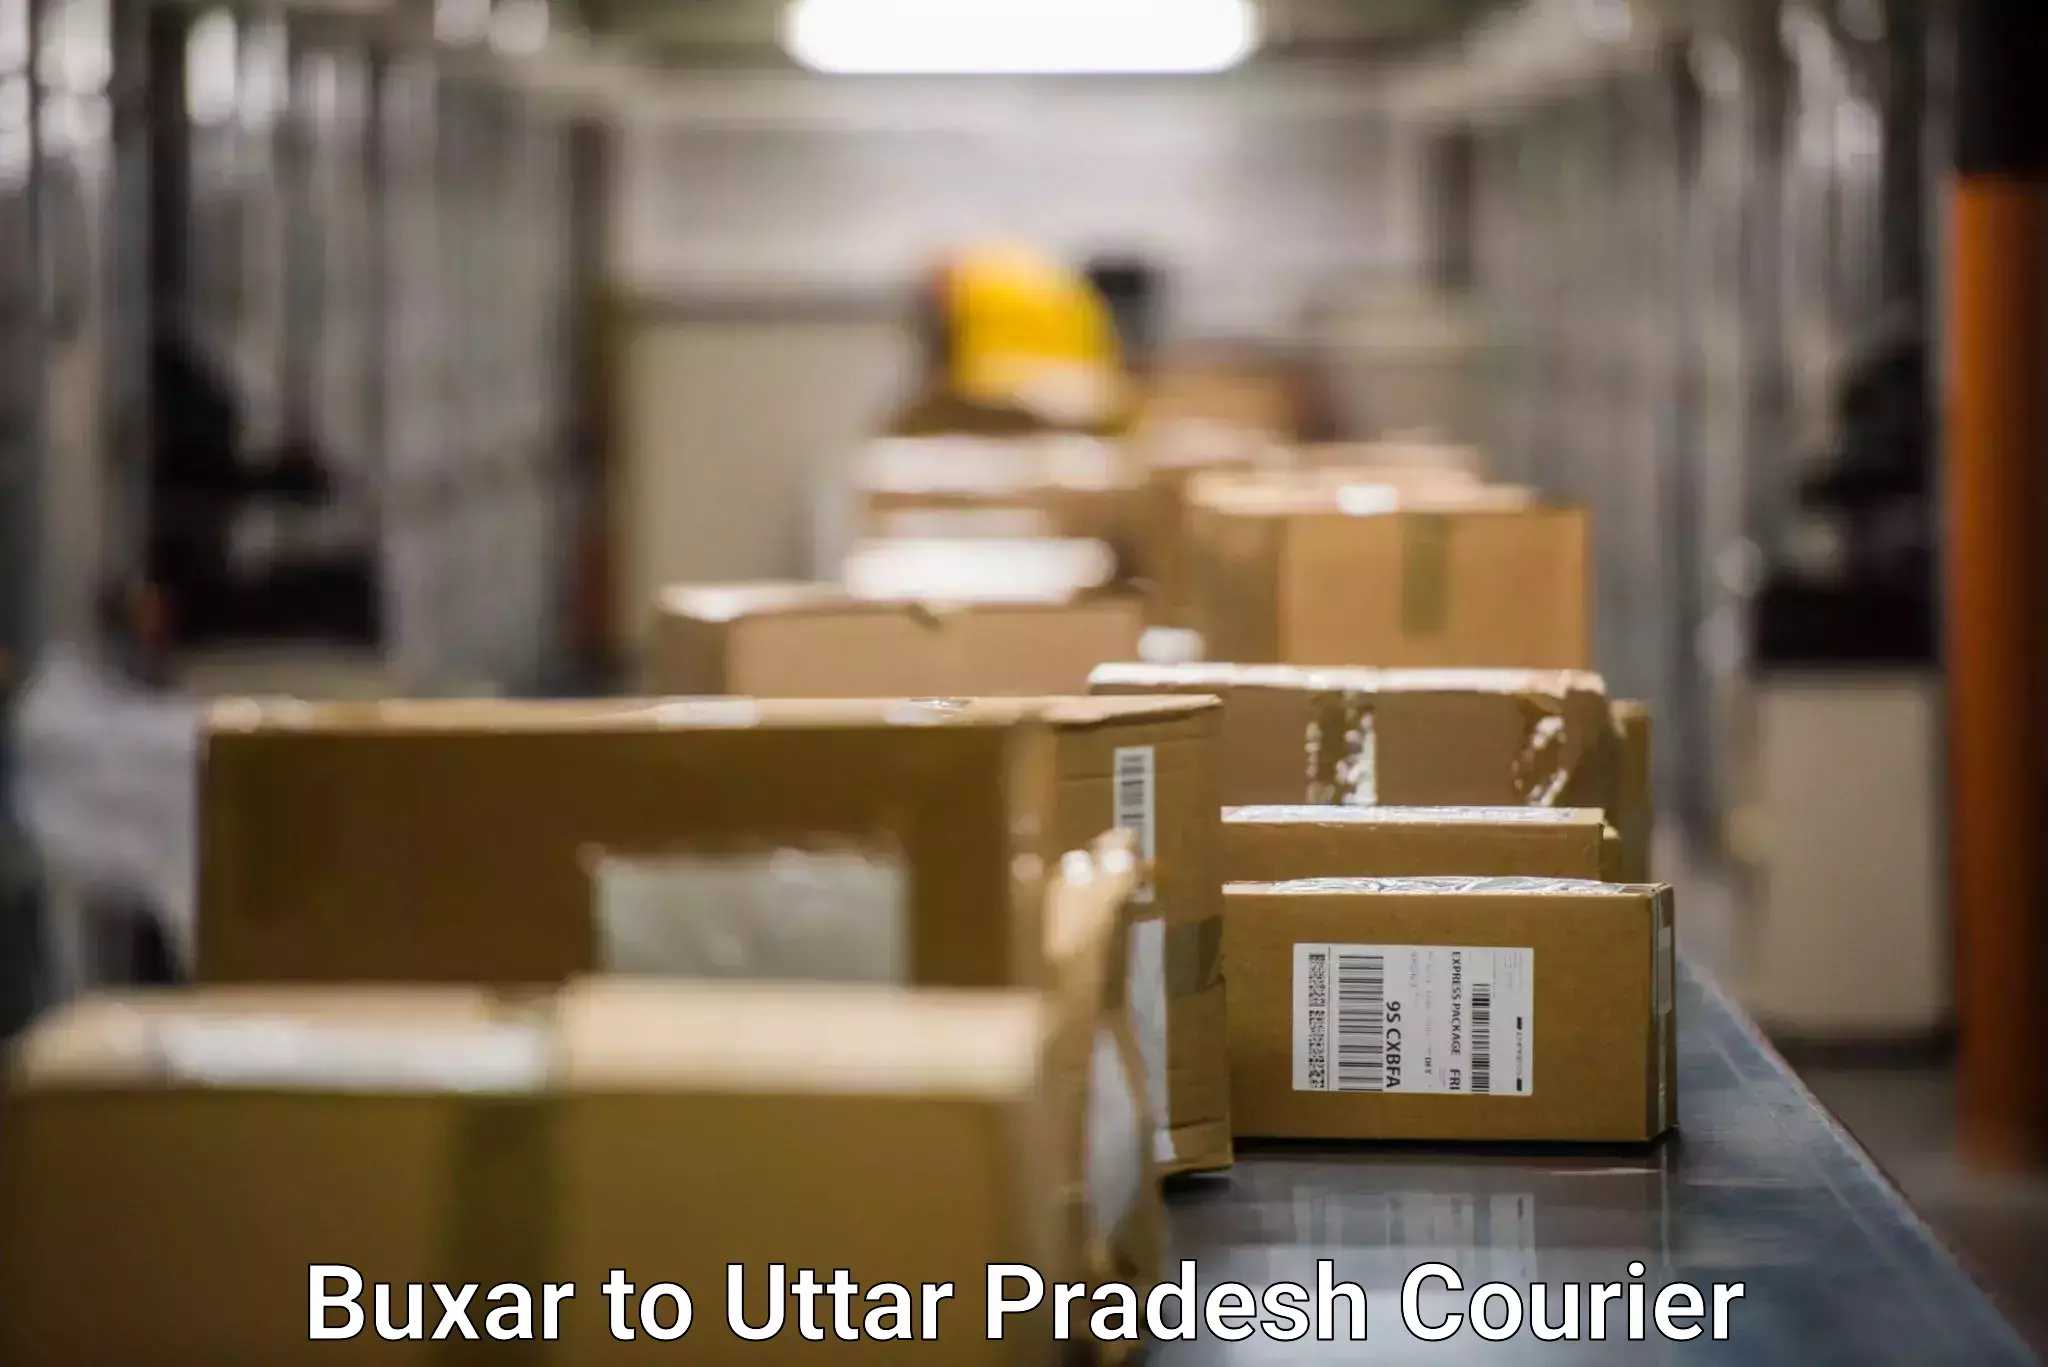 Reliable courier service Buxar to Dayalbagh Educational Institute Agra